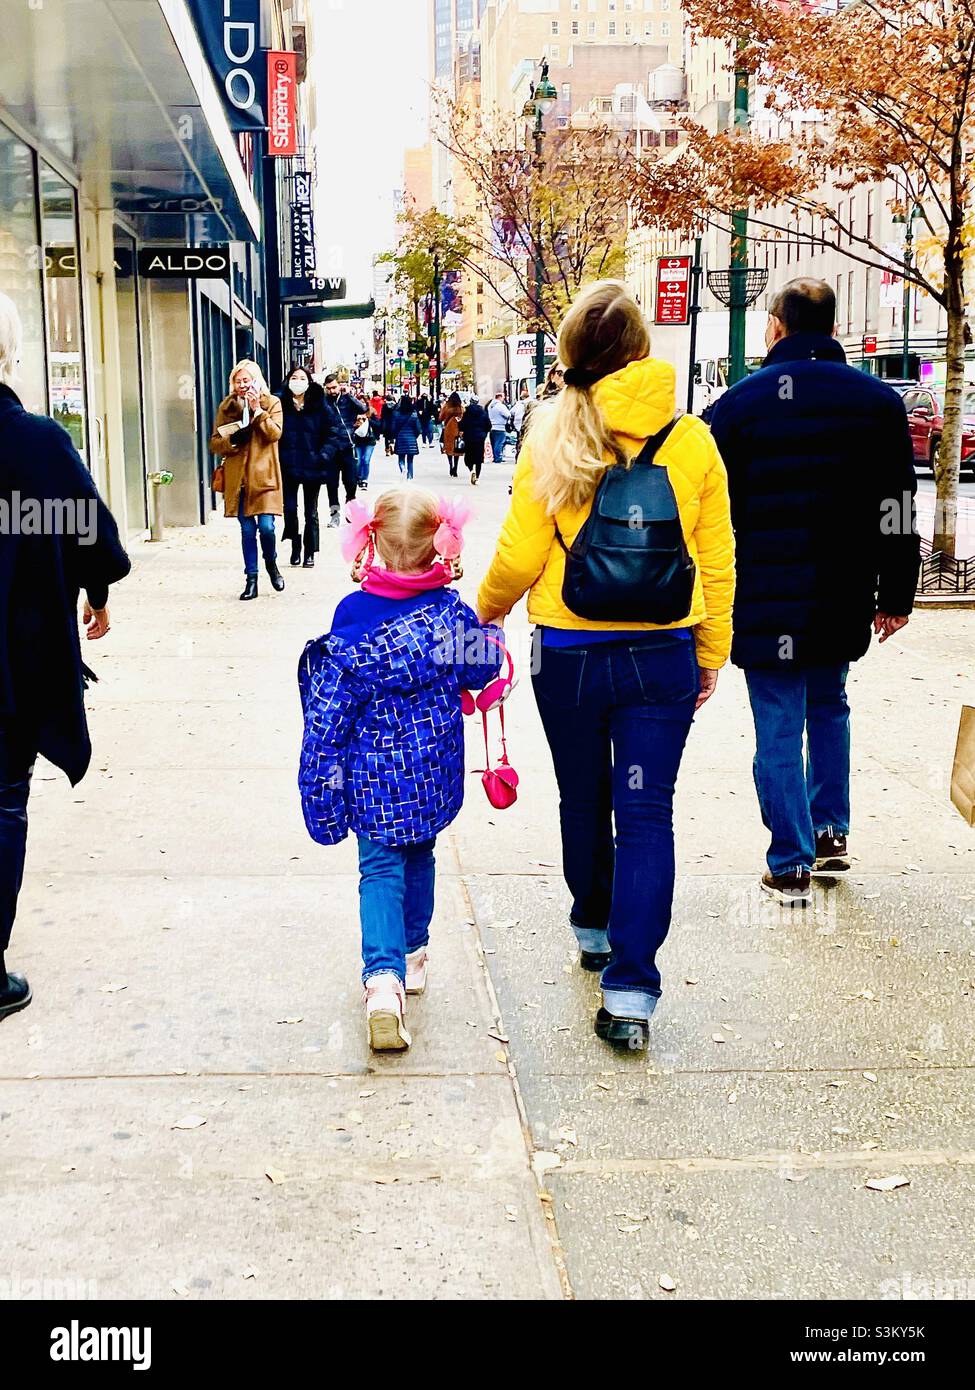 A cute little girl with pink ribbons in her hair walks with other pedestrians on a sidewalk in New York City Stock Photo